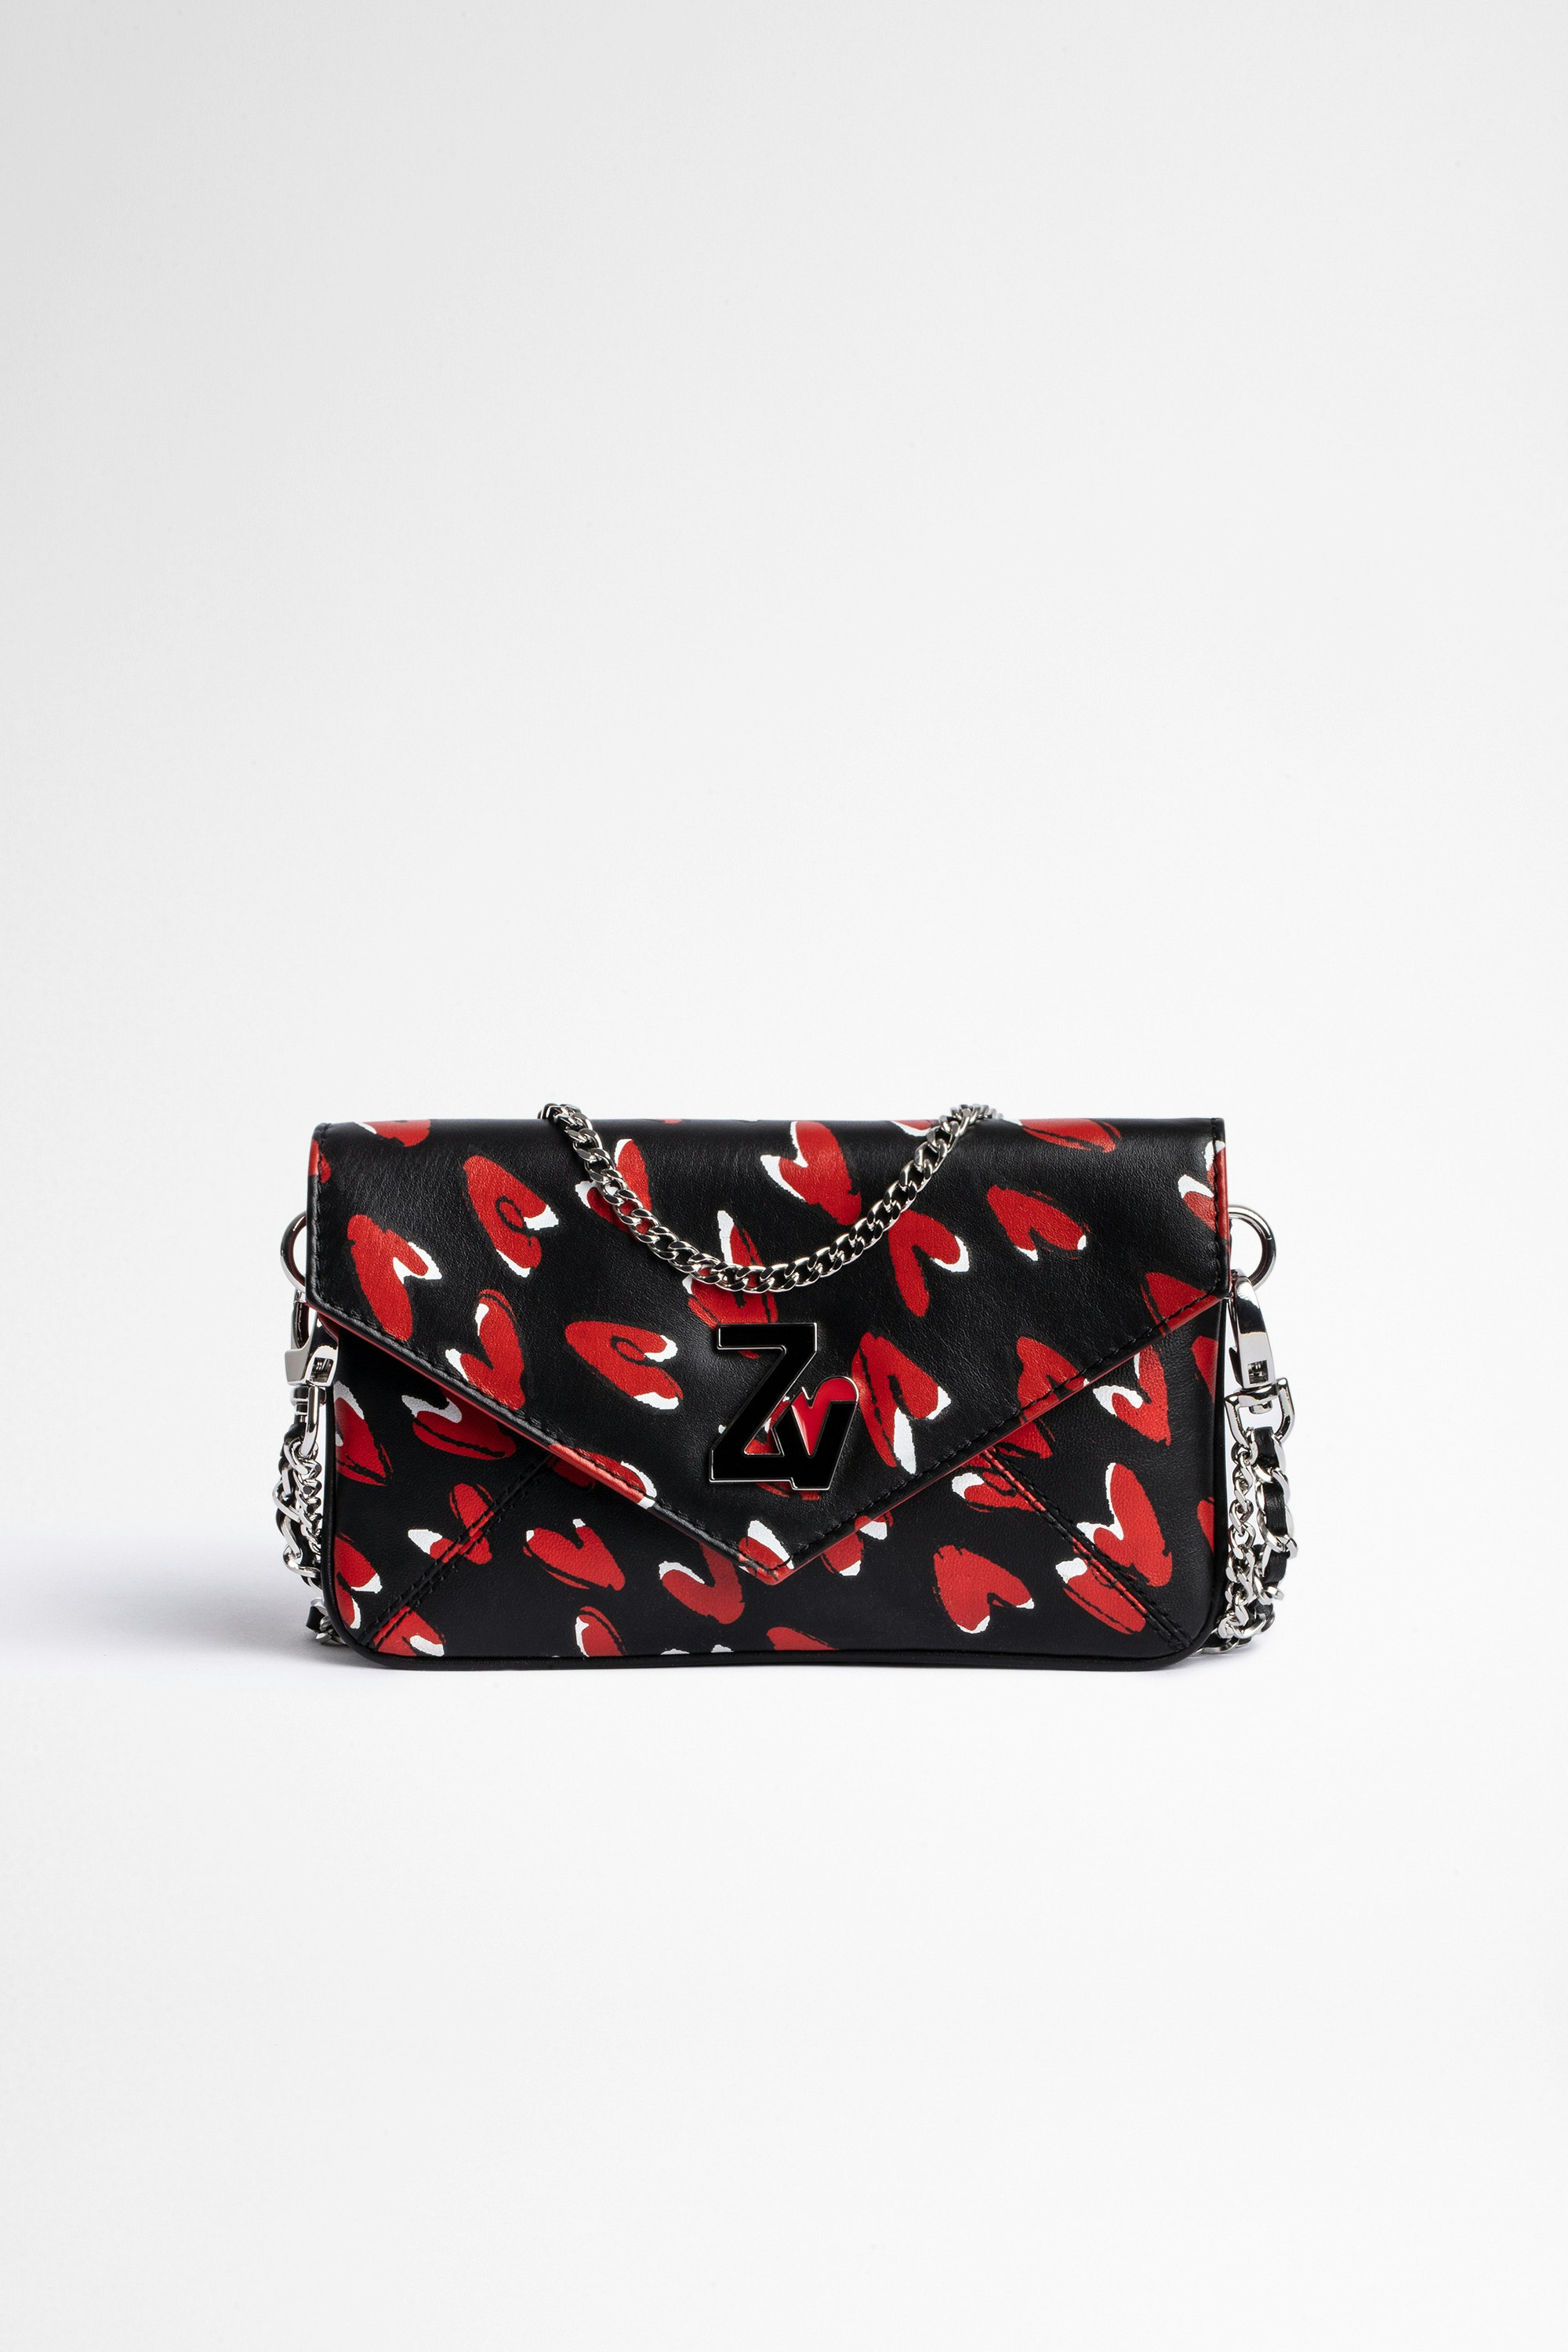 Rockeur ミニクラッチバッグ Small women’s clutch in black grained leather with pattern 